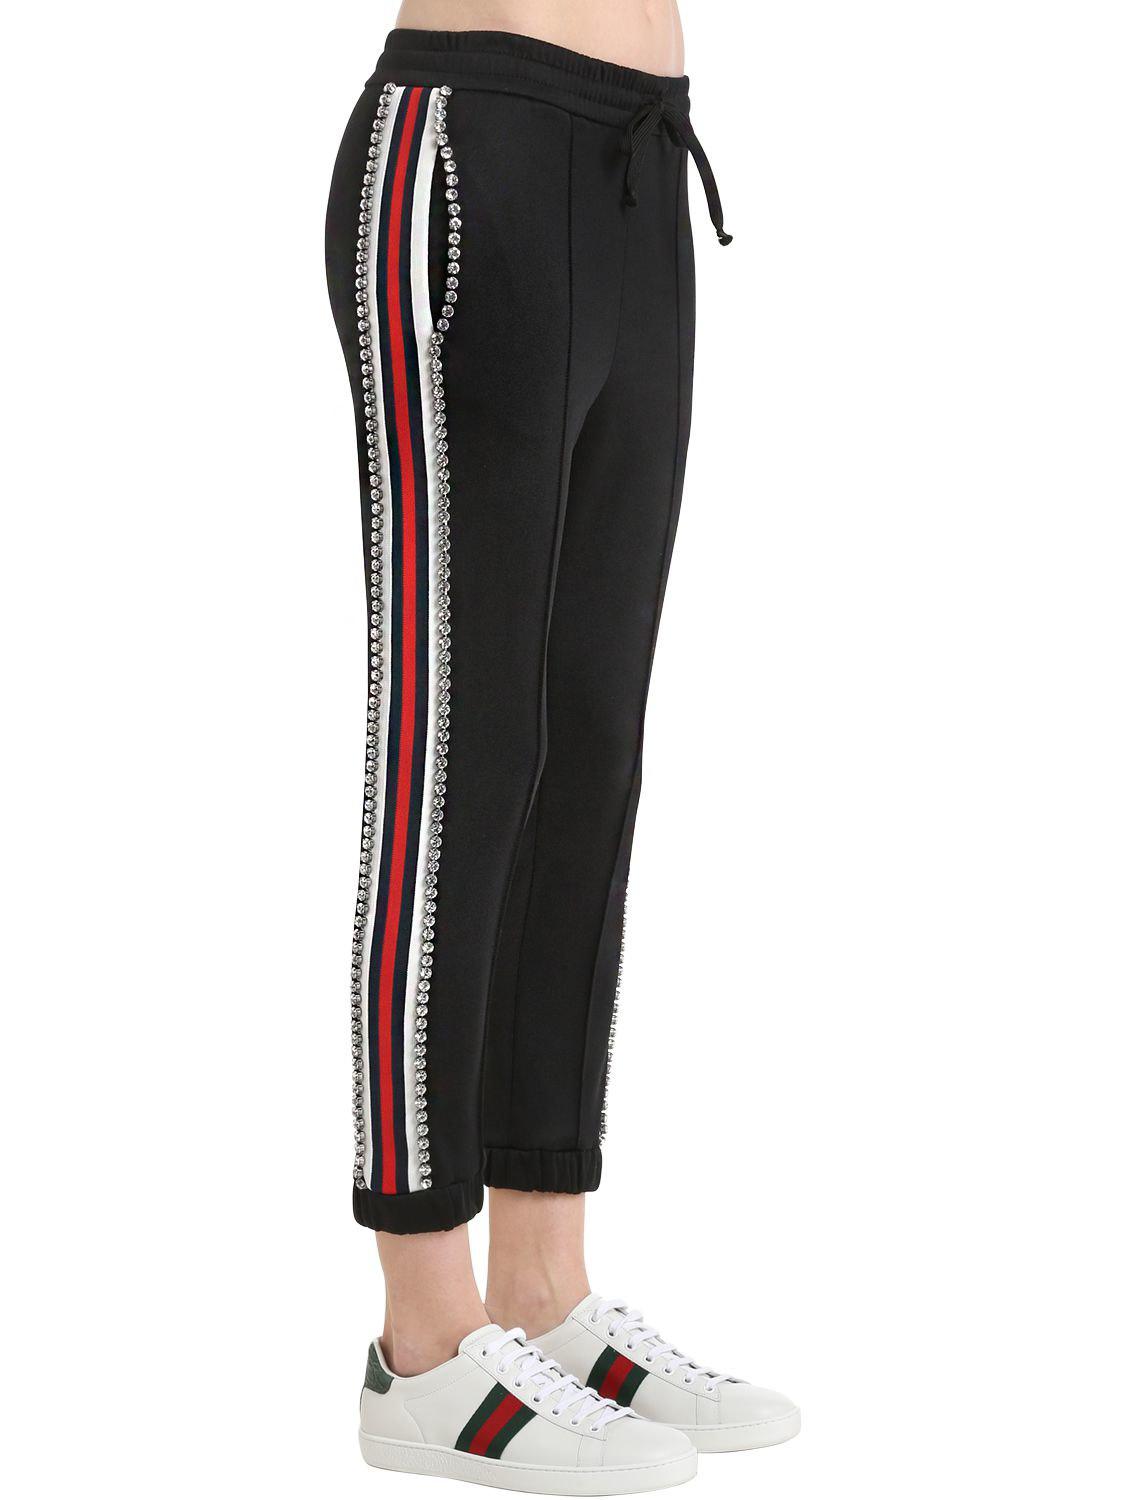 Gucci Crystal Techno Jersey Track Pants in Black - Lyst